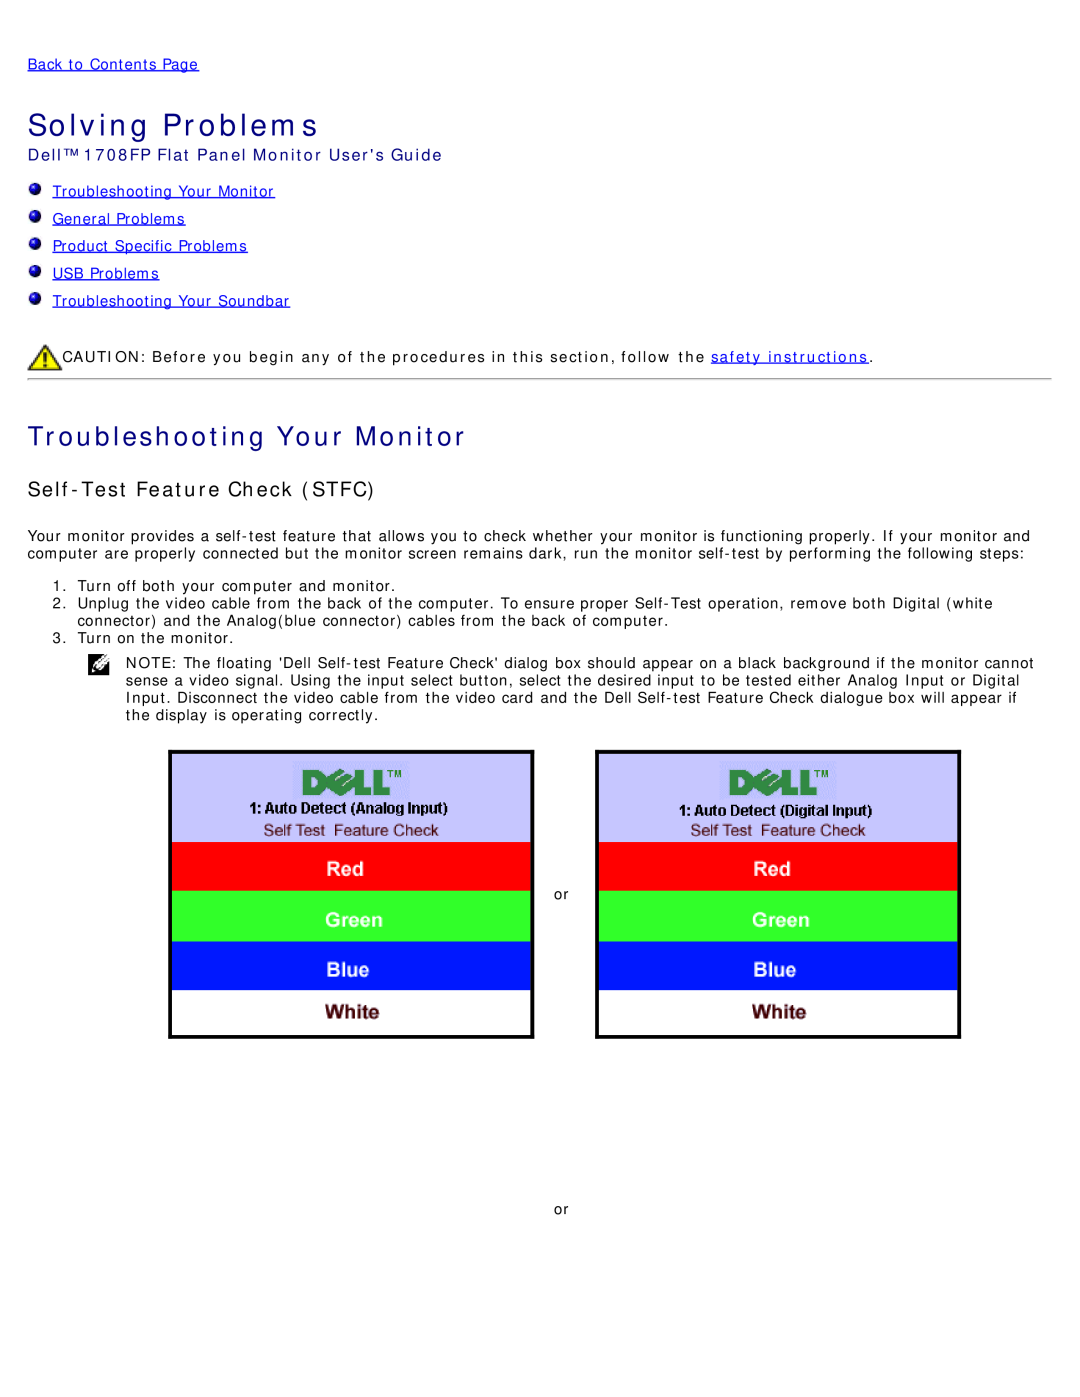 Dell appendix Troubleshooting Your Monitor, Self-Test Feature Check STFC, Dell 1708FP Flat Panel Monitor Users Guide 